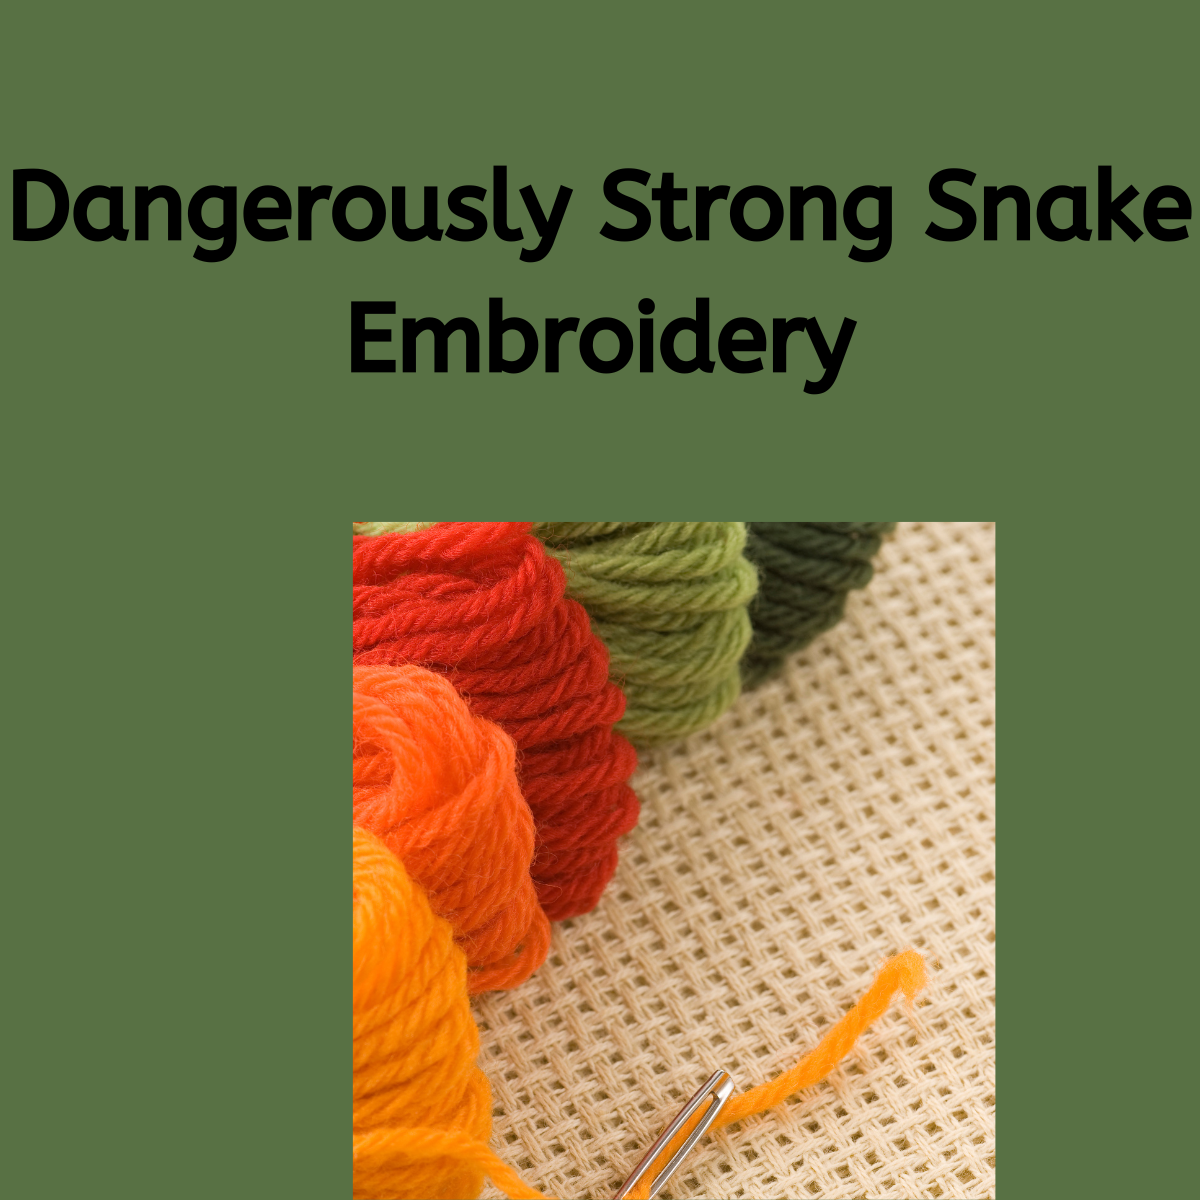 Snake embroidery ideas